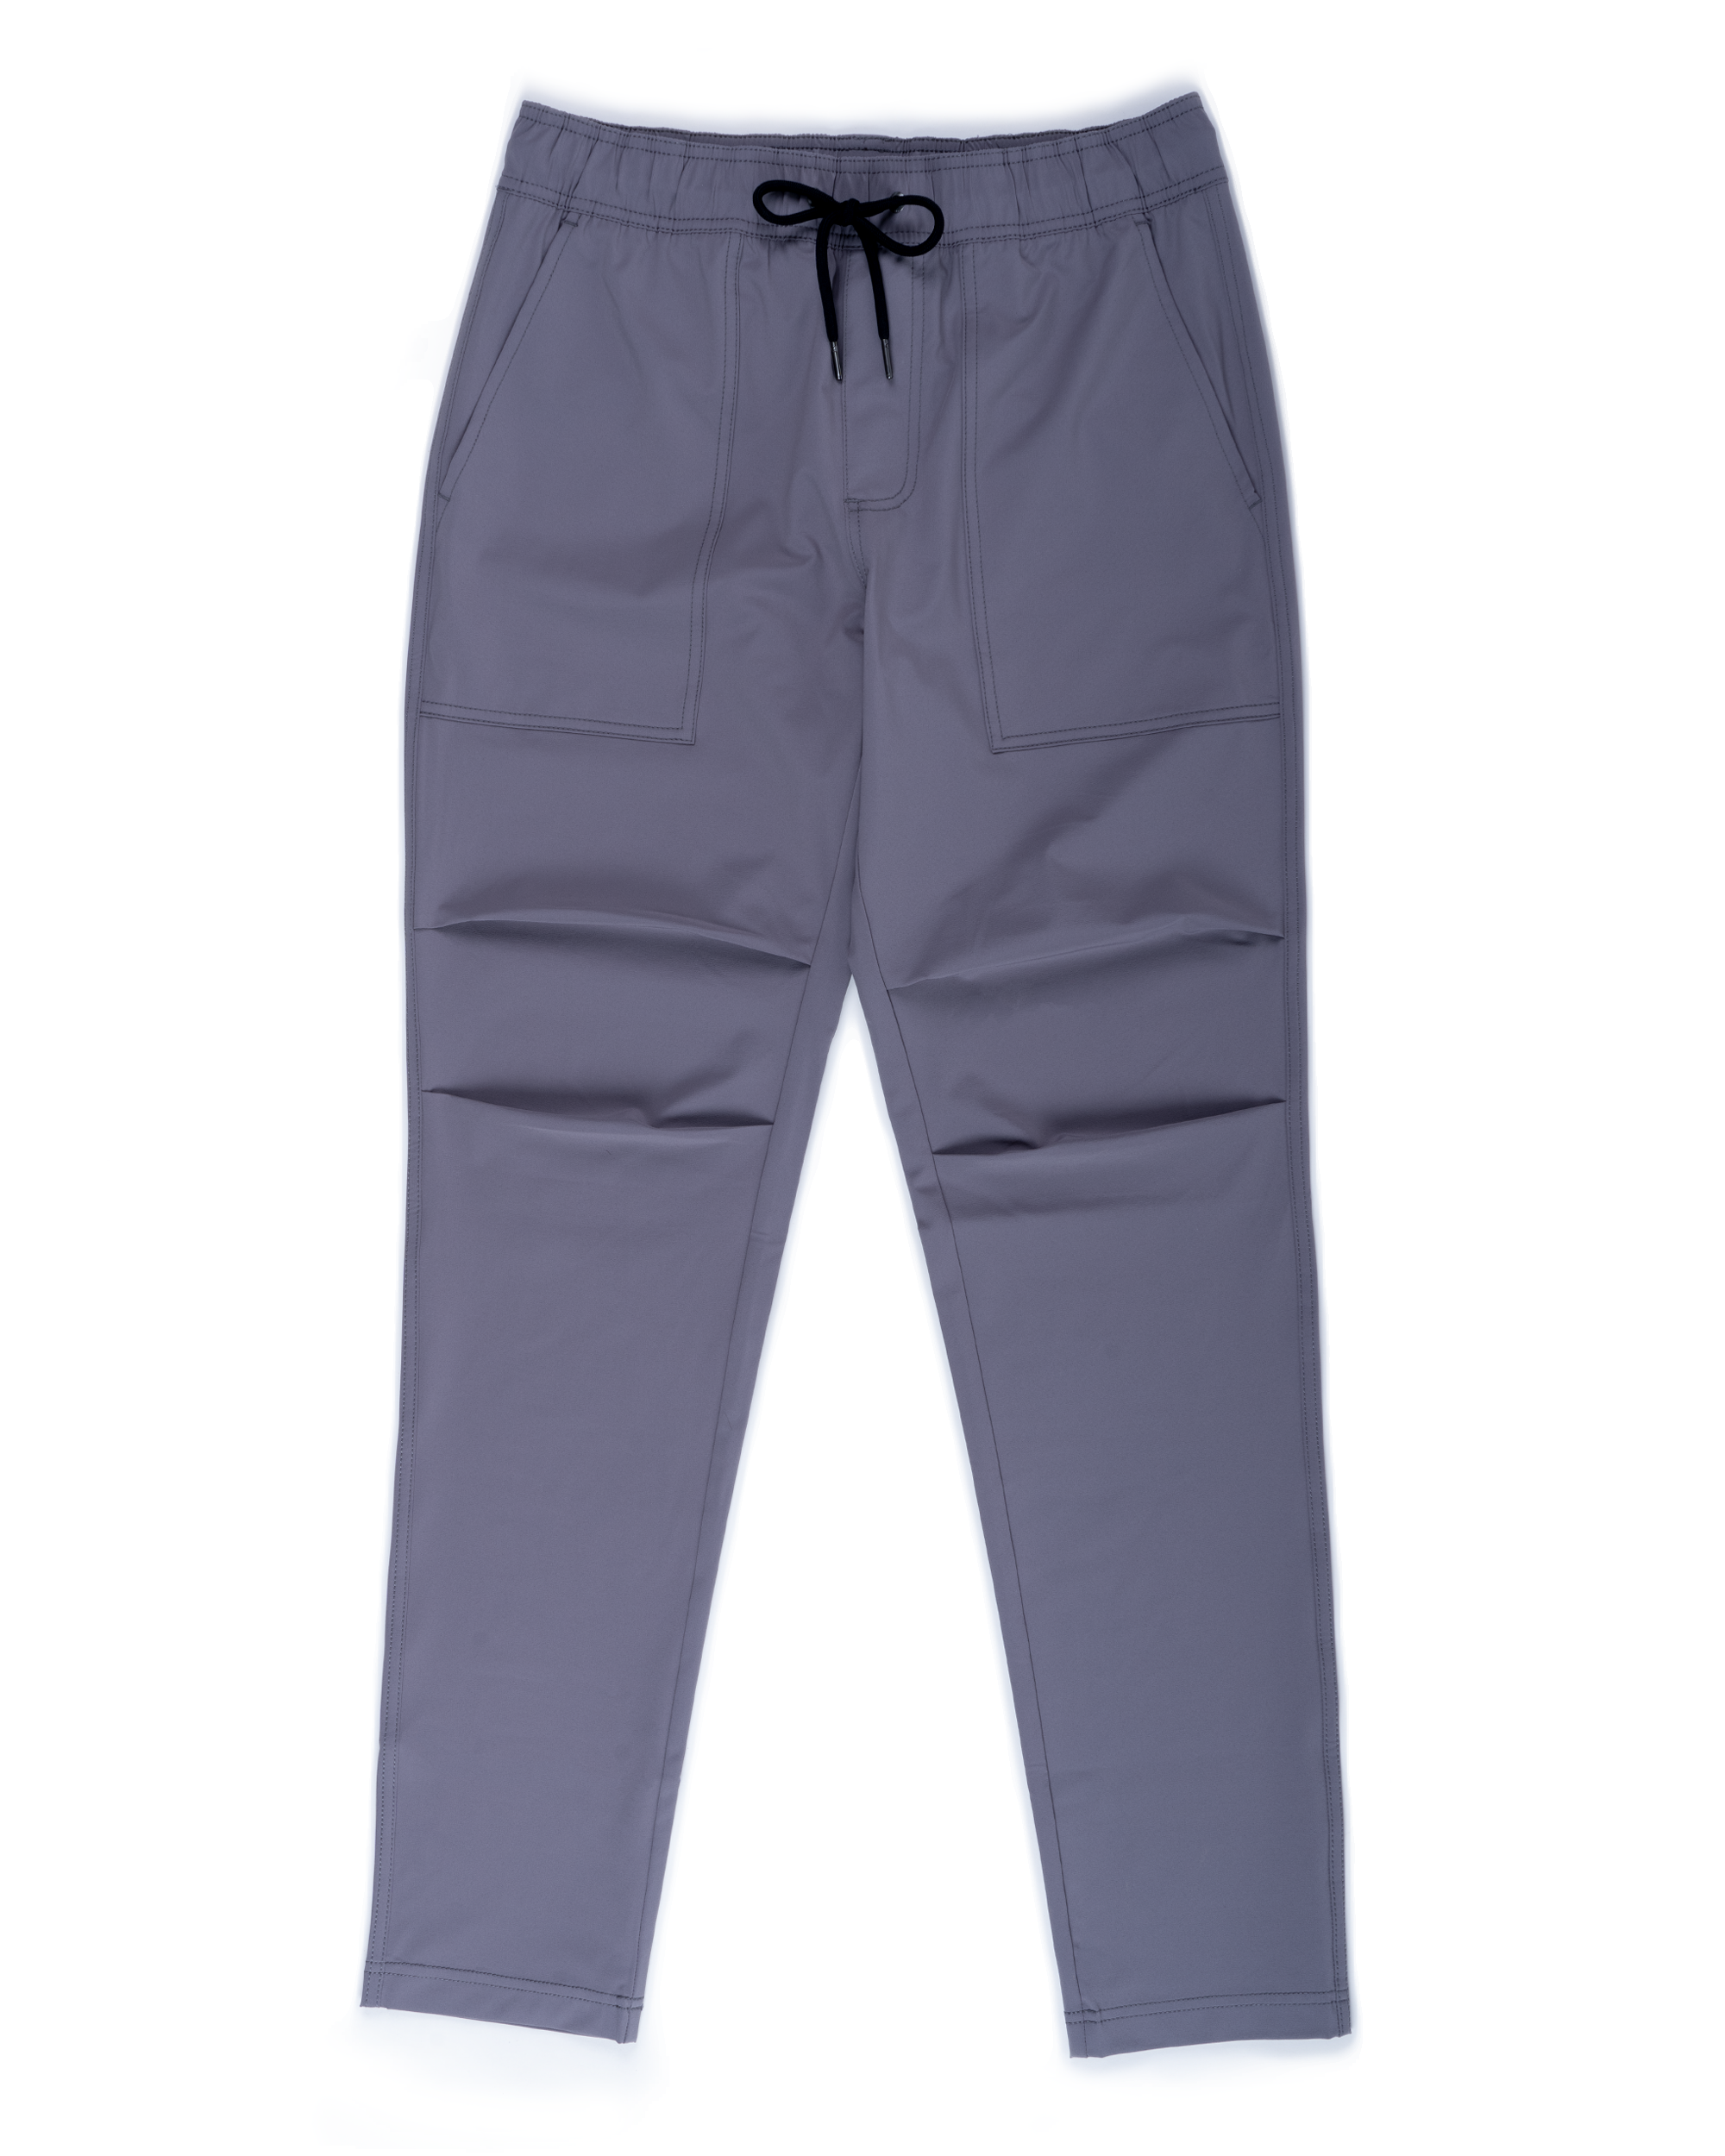 Utility Pull On Performance Pant Grey - Foreign Rider Co.